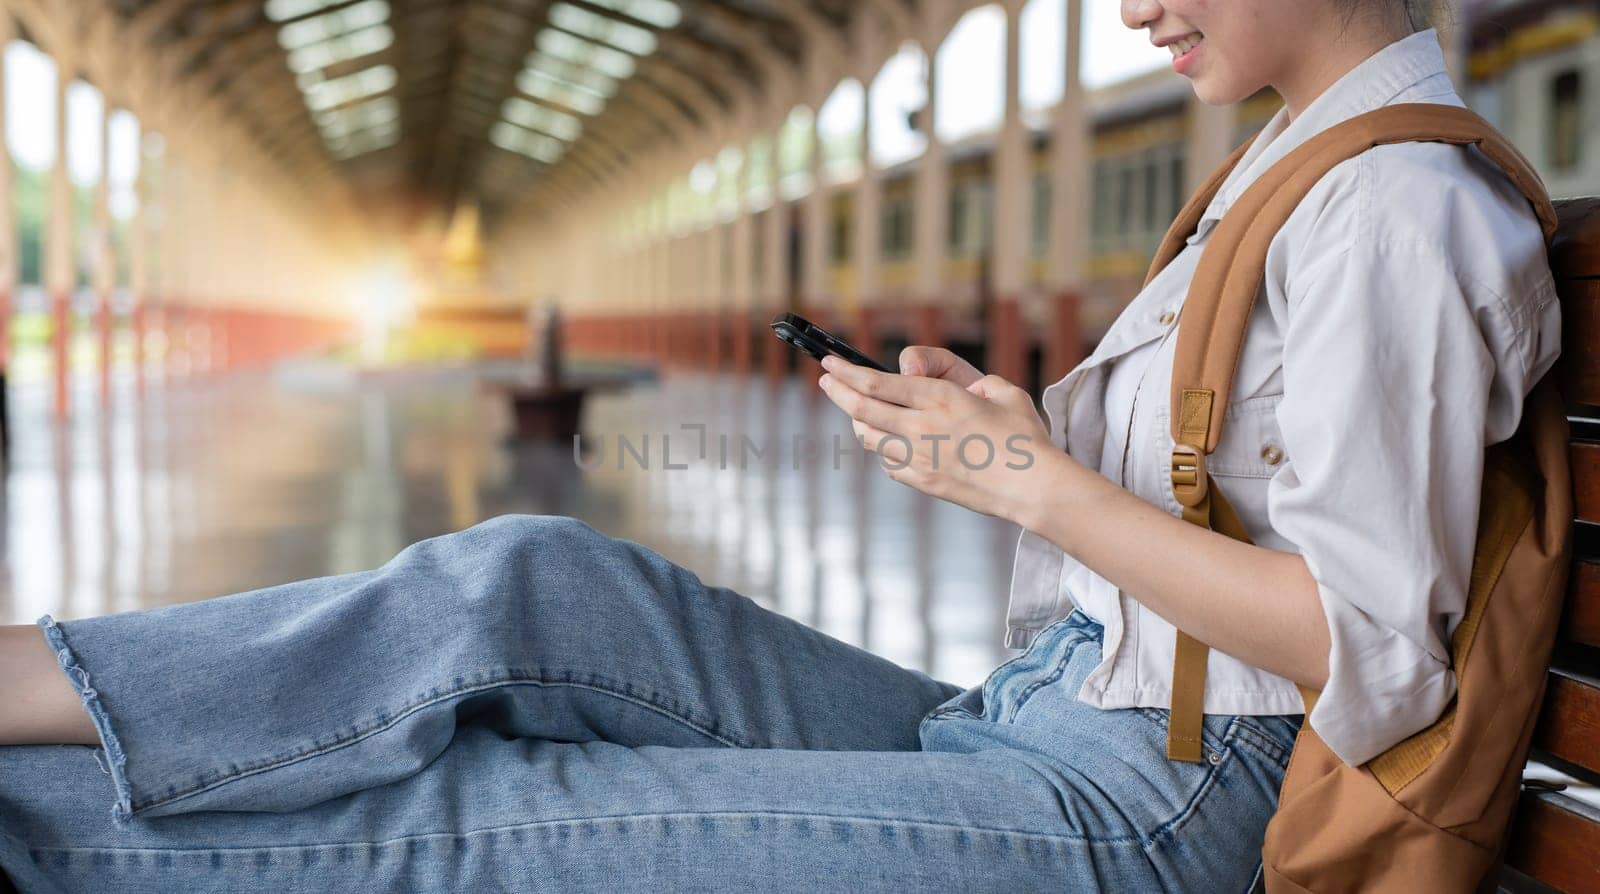 Young woman with backpack checking social media on phone waiting for train at train station to travel.